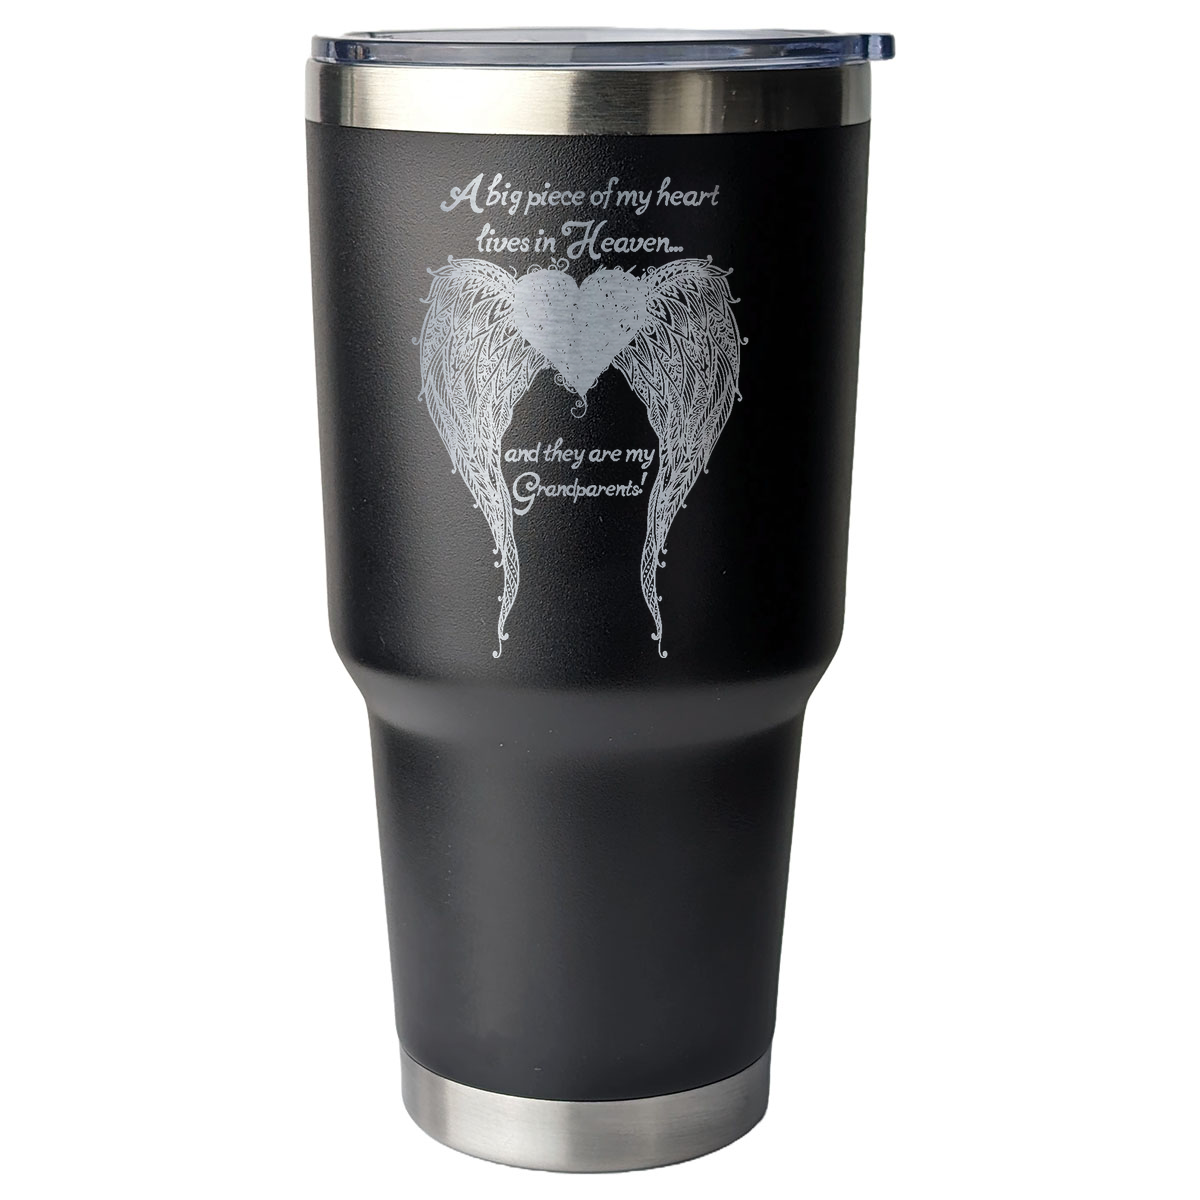 Grandparents - A Big Piece of my Heart 30 Ounce Laser Etched Tumbler Black